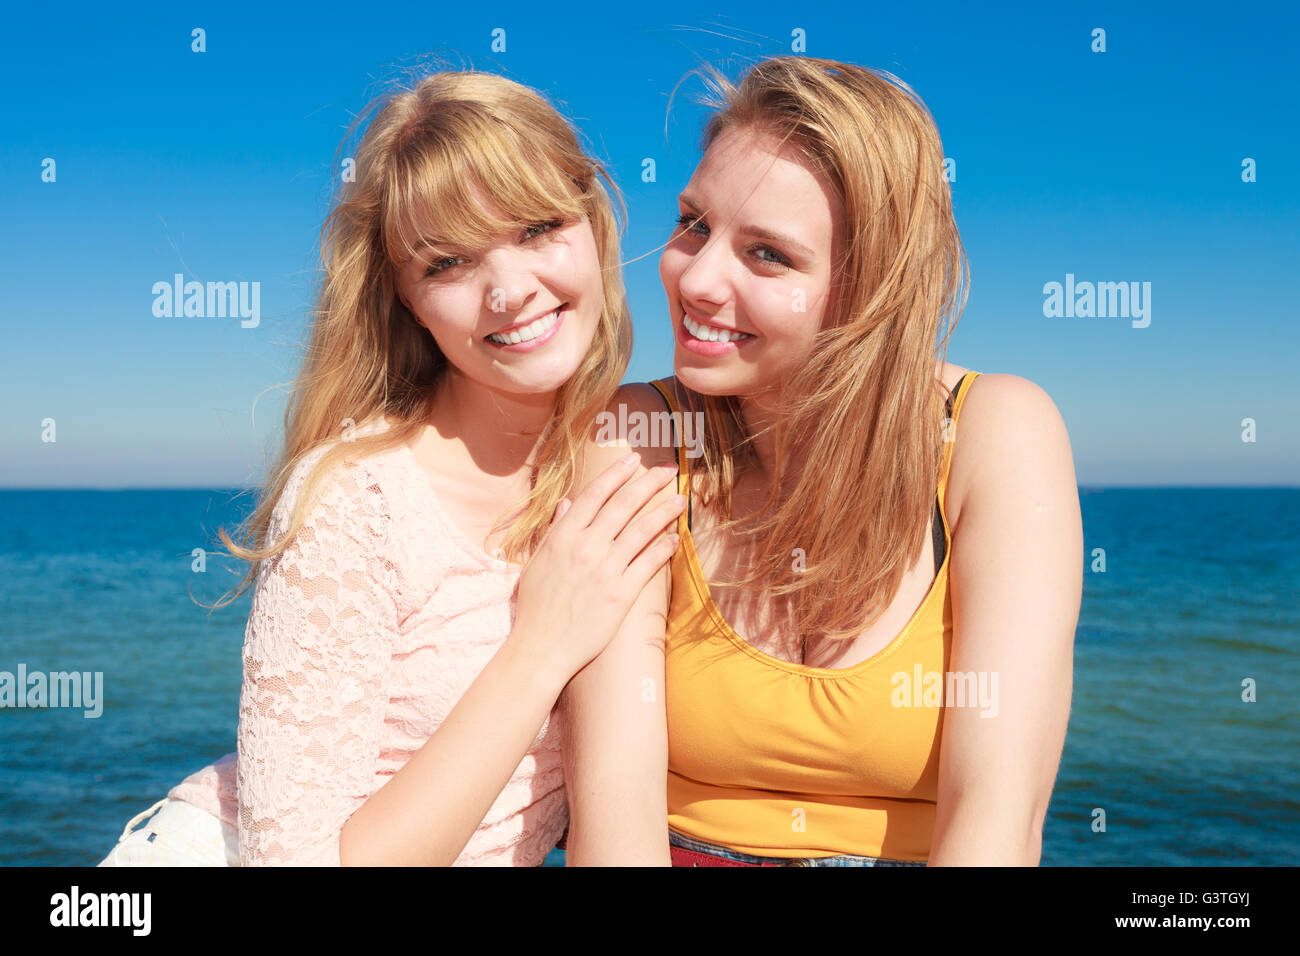 Two young women best friends blonde cheerful girls having fun outdoor wind blowing in hair. Summer happiness friendship concept. Stock Photo